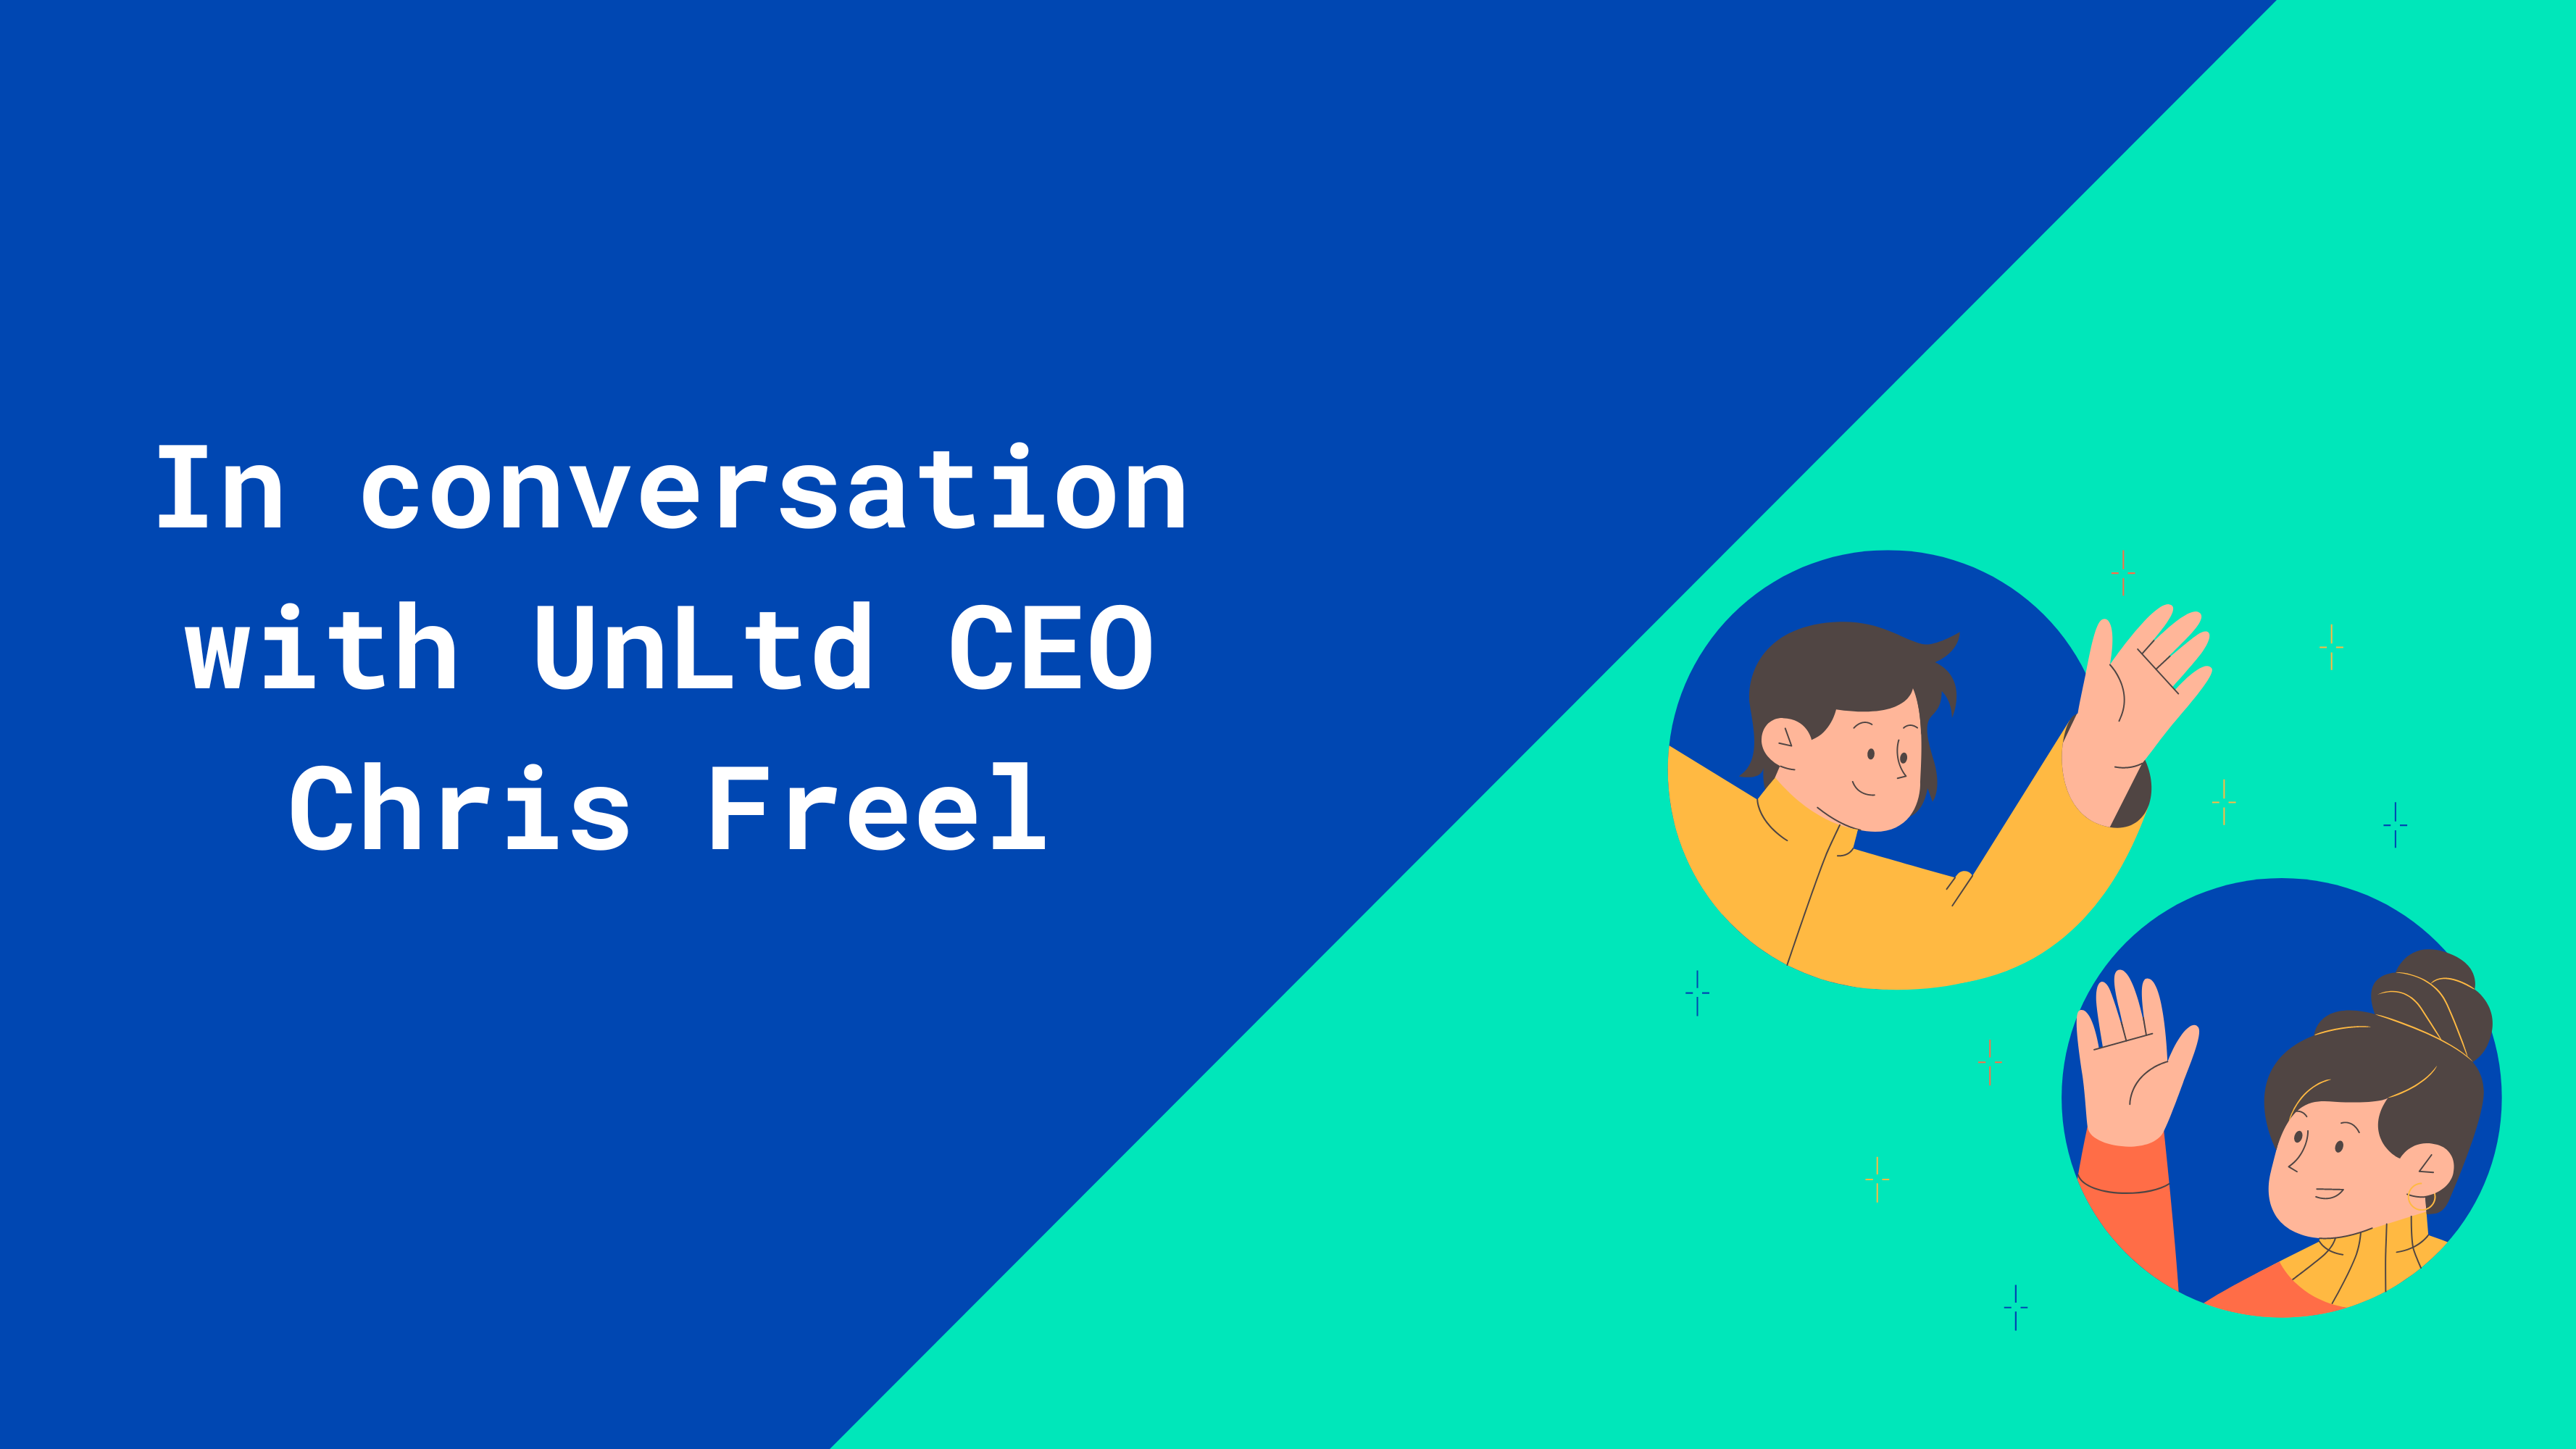 A man and a woman waving to each other next to the text "In conversation with UnLtd CEO Chris Freel"